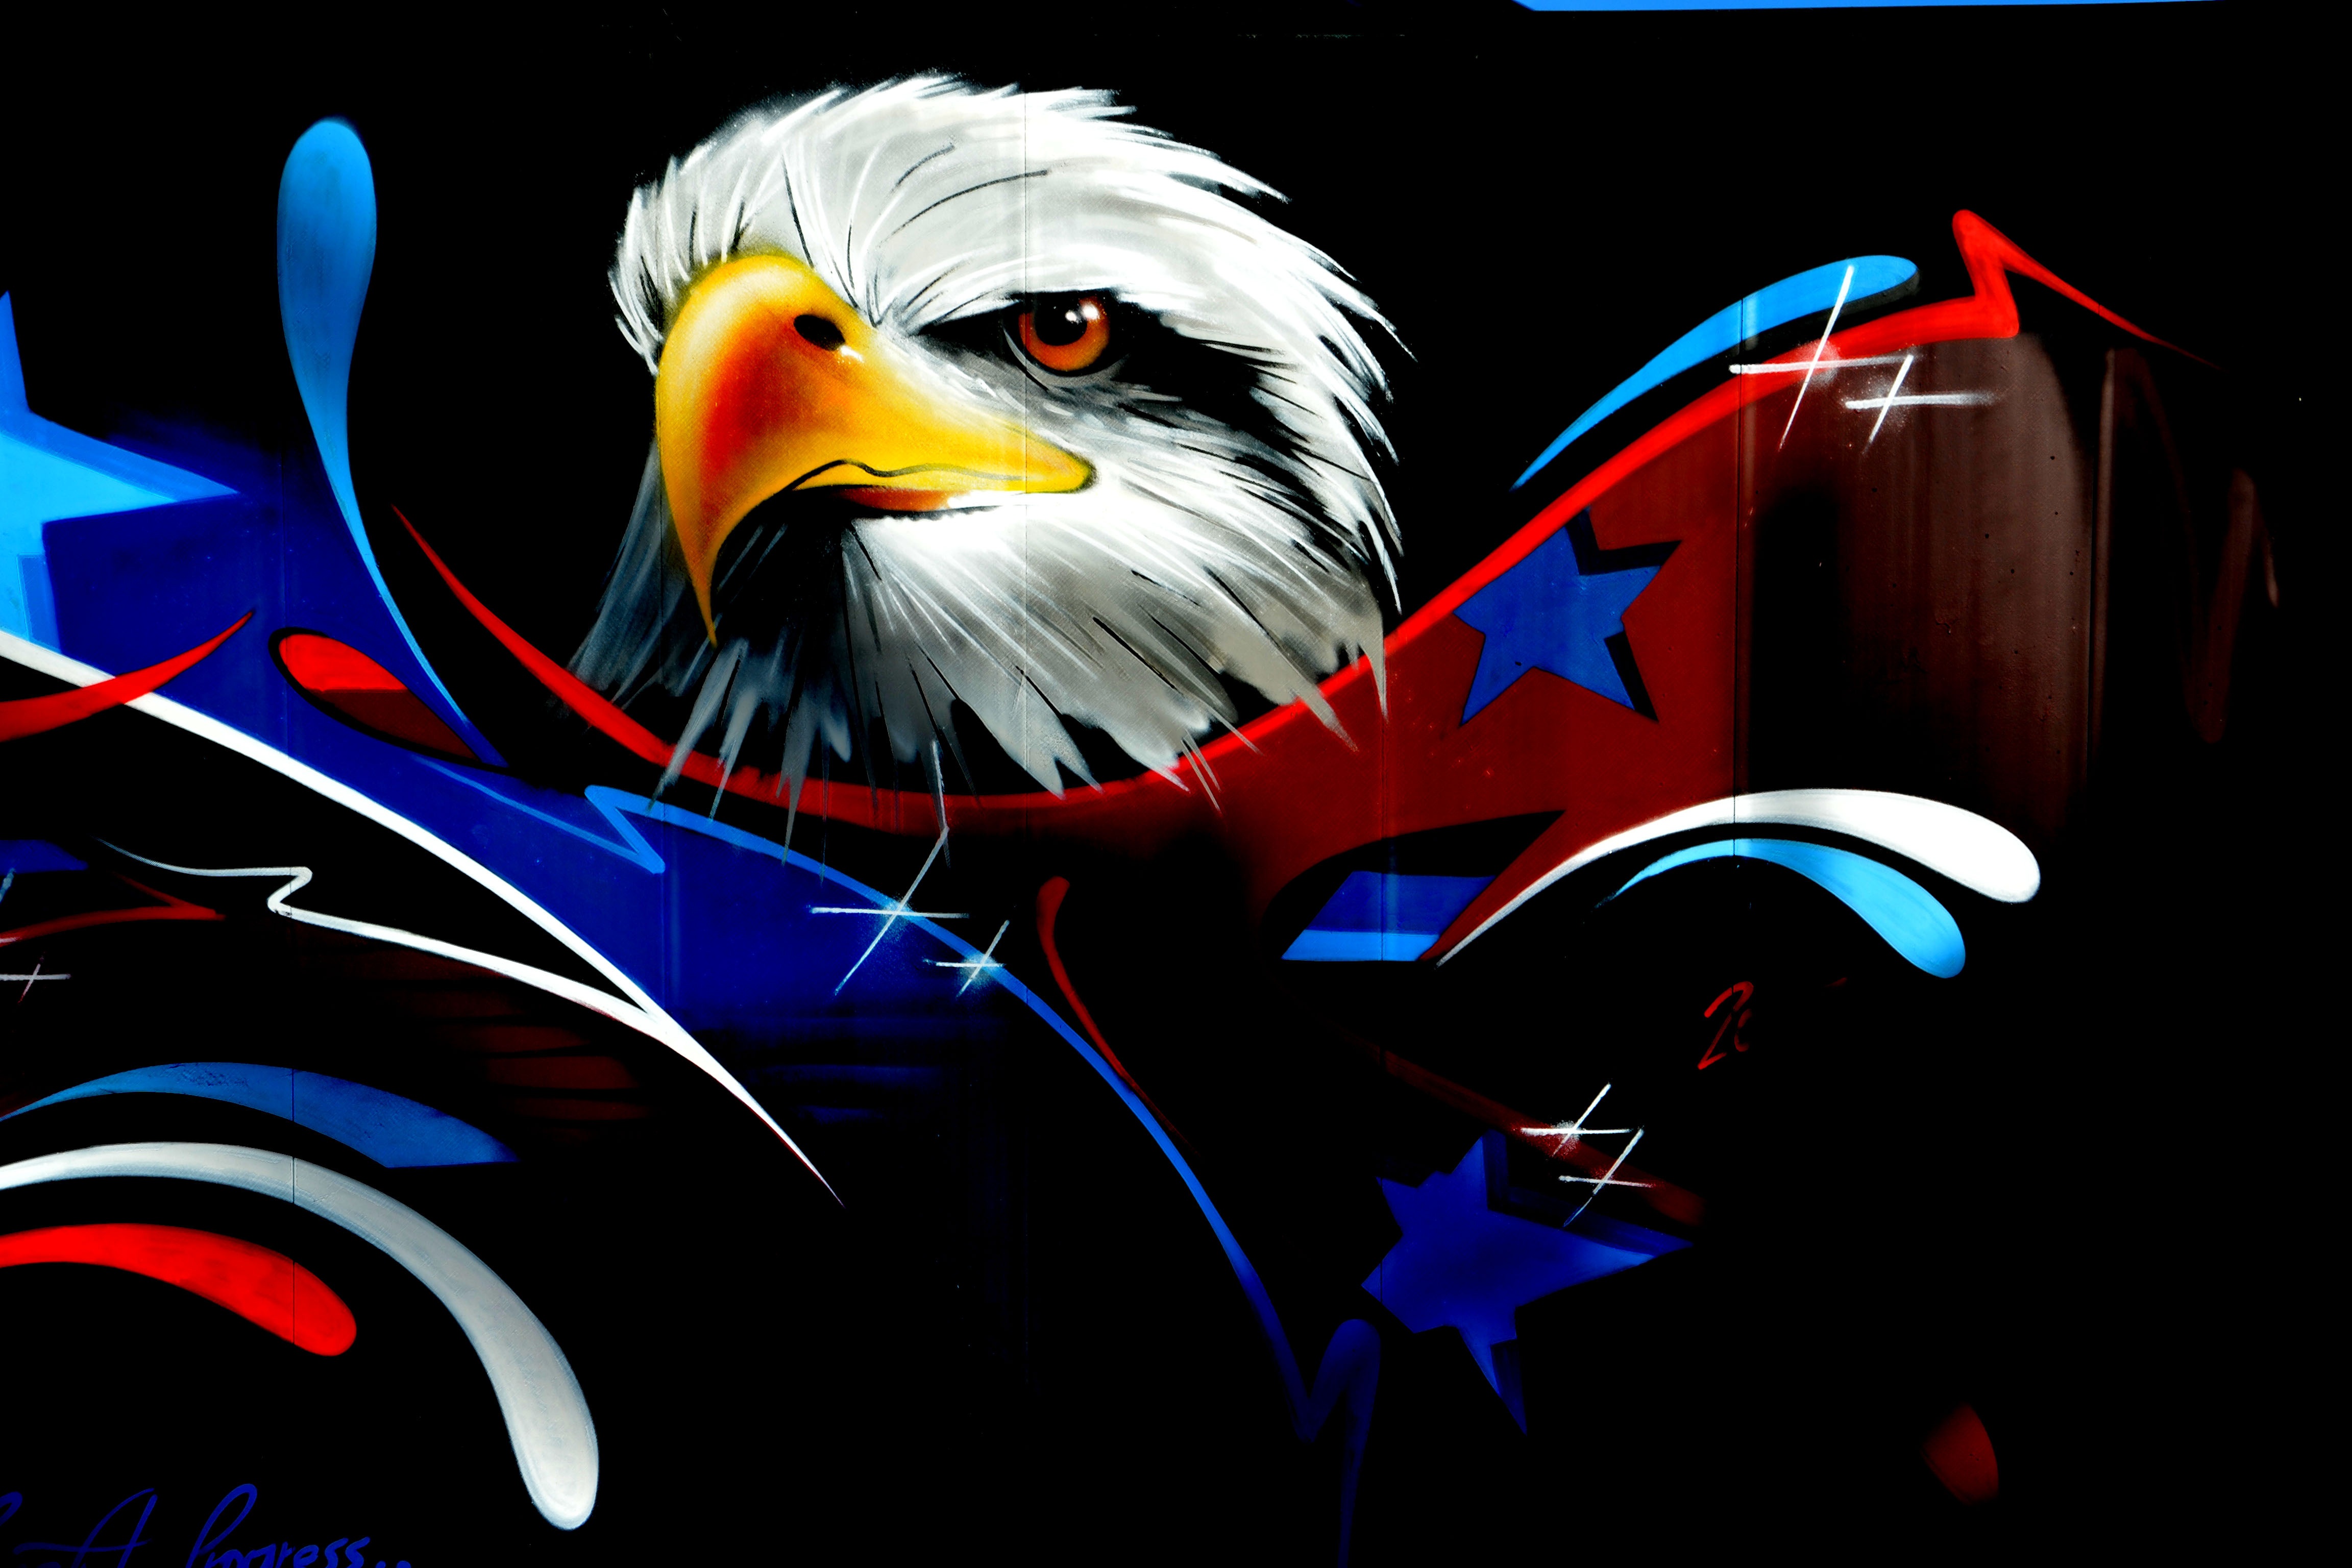 83755 download wallpaper art, wall, eagle, graffiti screensavers and pictures for free